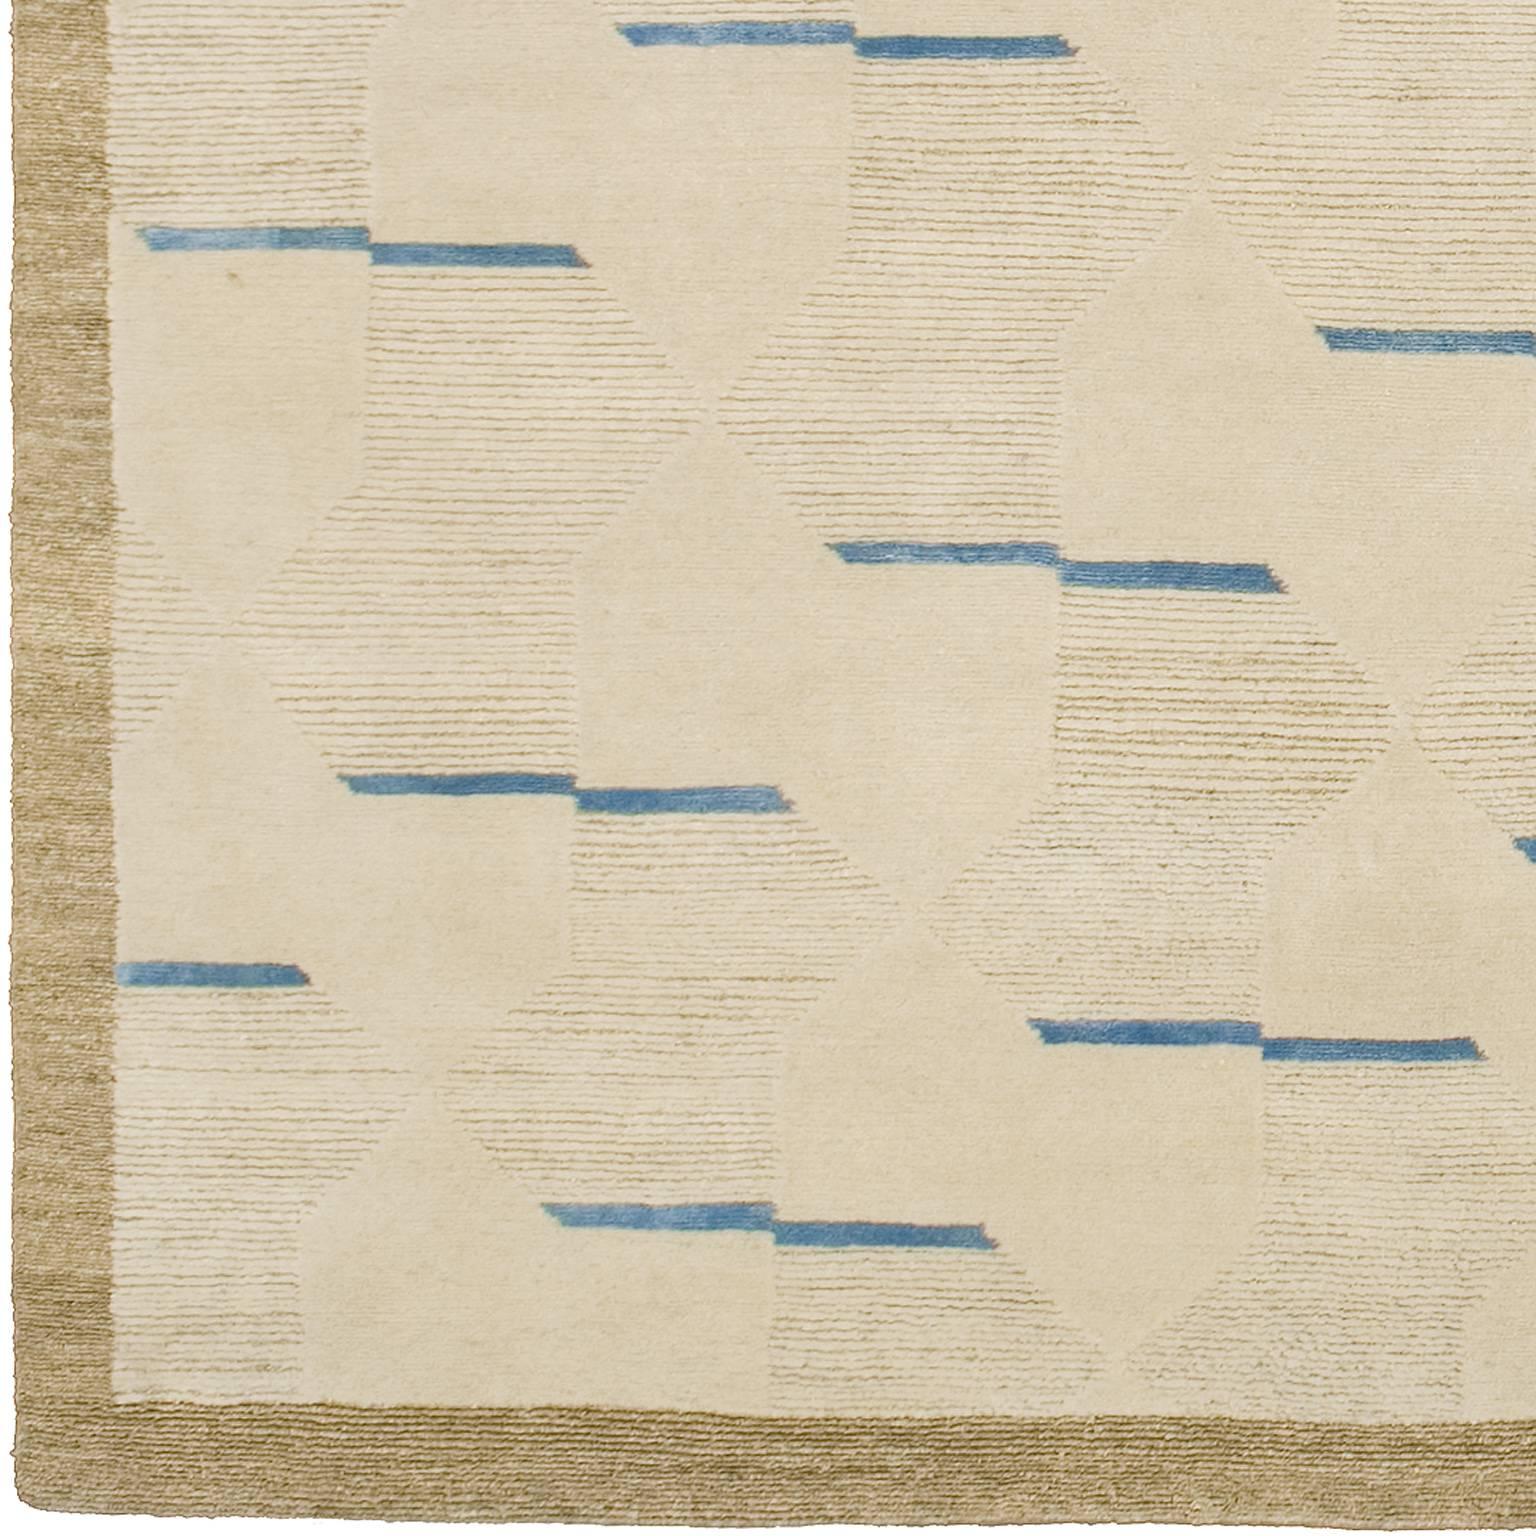 This newly handwoven ‘Bow-Tie' rug is composed of Tibetan wool and silk & Nettle plant fiber which attributes an amazing all-over geometric pattern. With it's 'Stinging' Nettle all around looped border flowing into the design elements, crossing